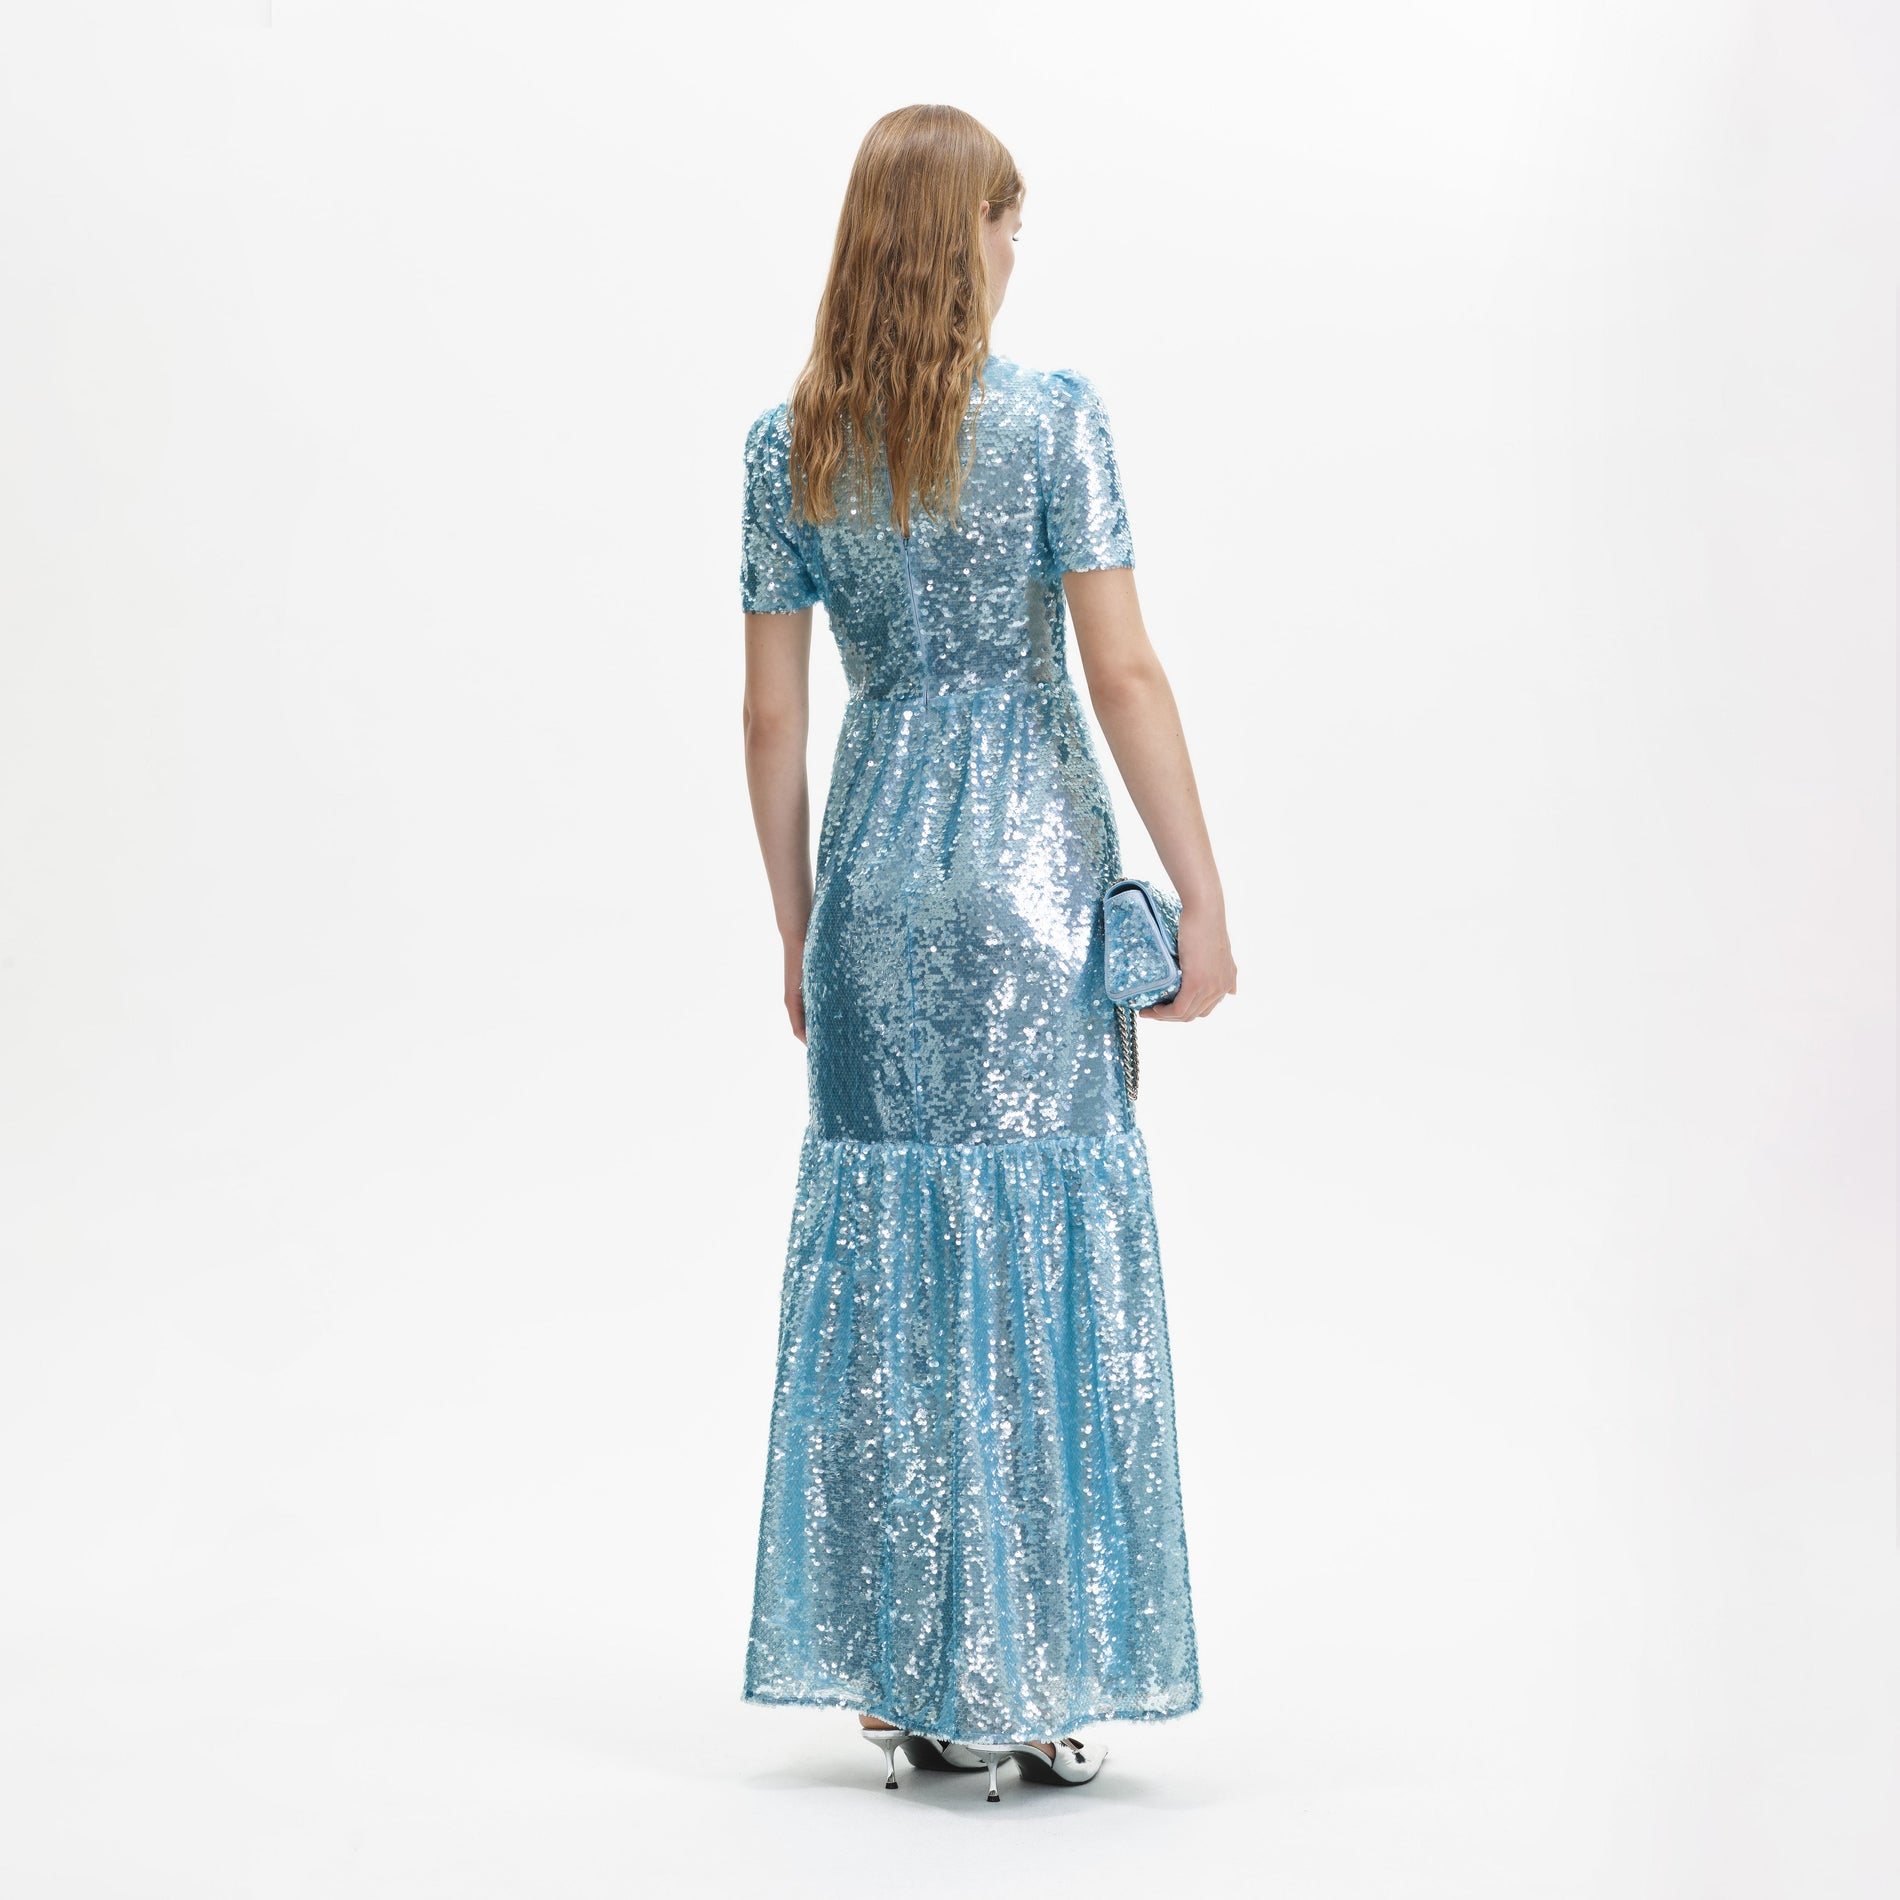 A woman wearing the Blue Sequin Tier Maxi Dress